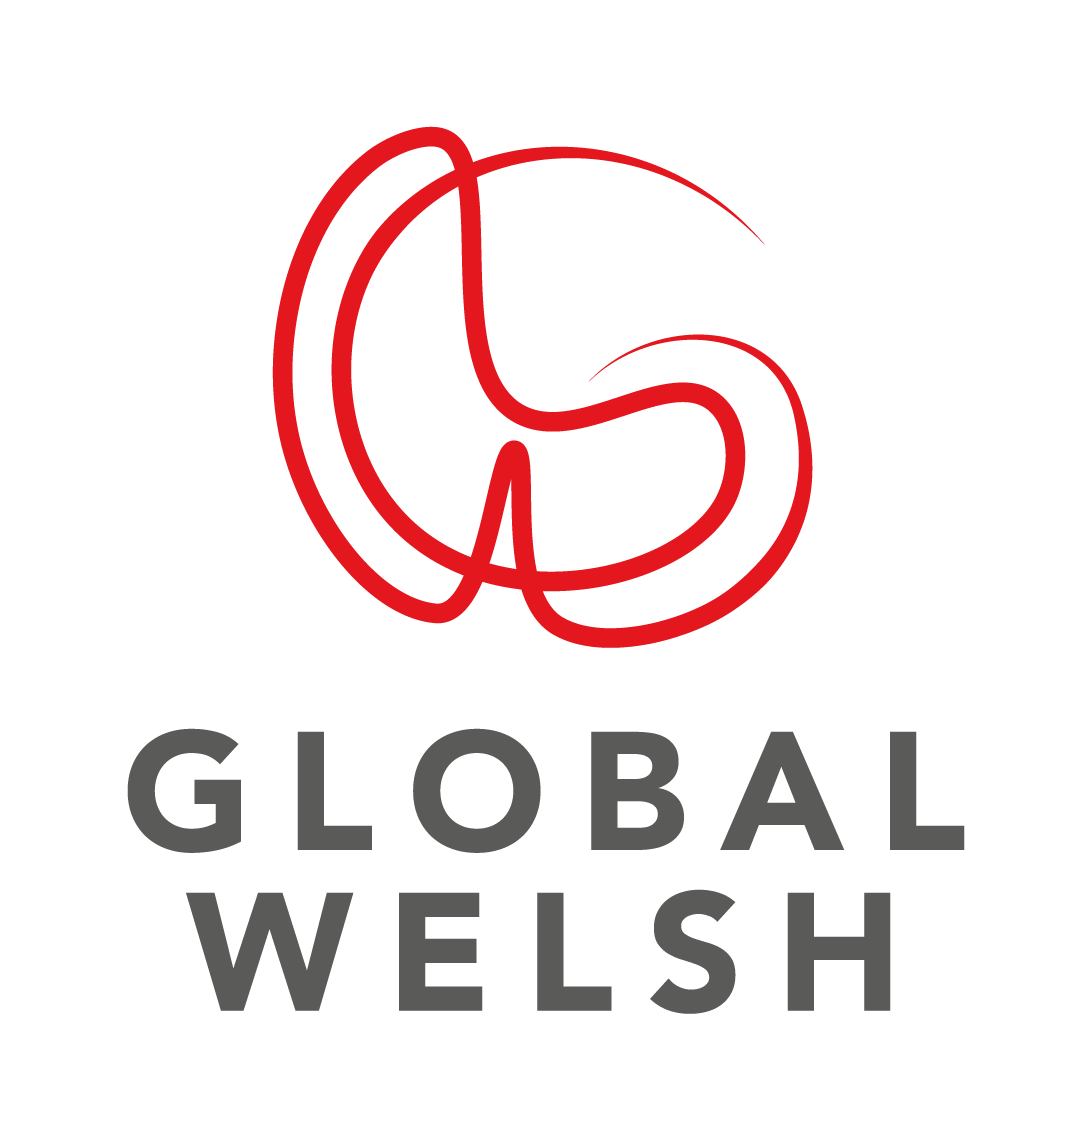 Global Welsh - Primary - Full Colour.png